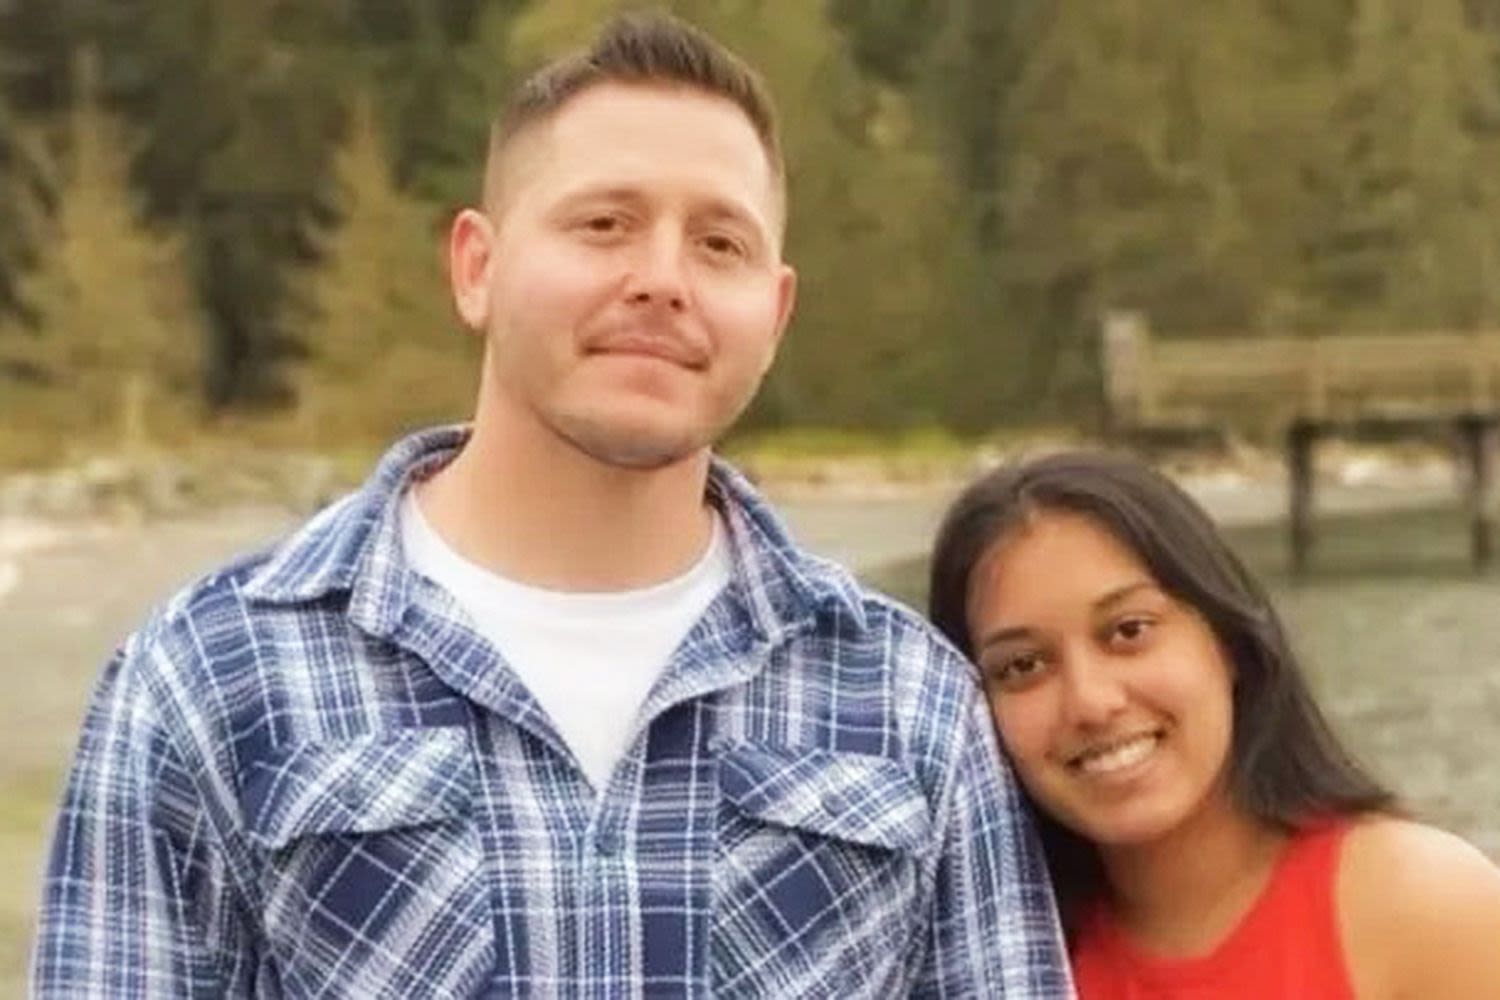 High School Sweethearts Who Were About to Get Engaged Dead in Motorcycle Crash: ‘She Was His Queen’